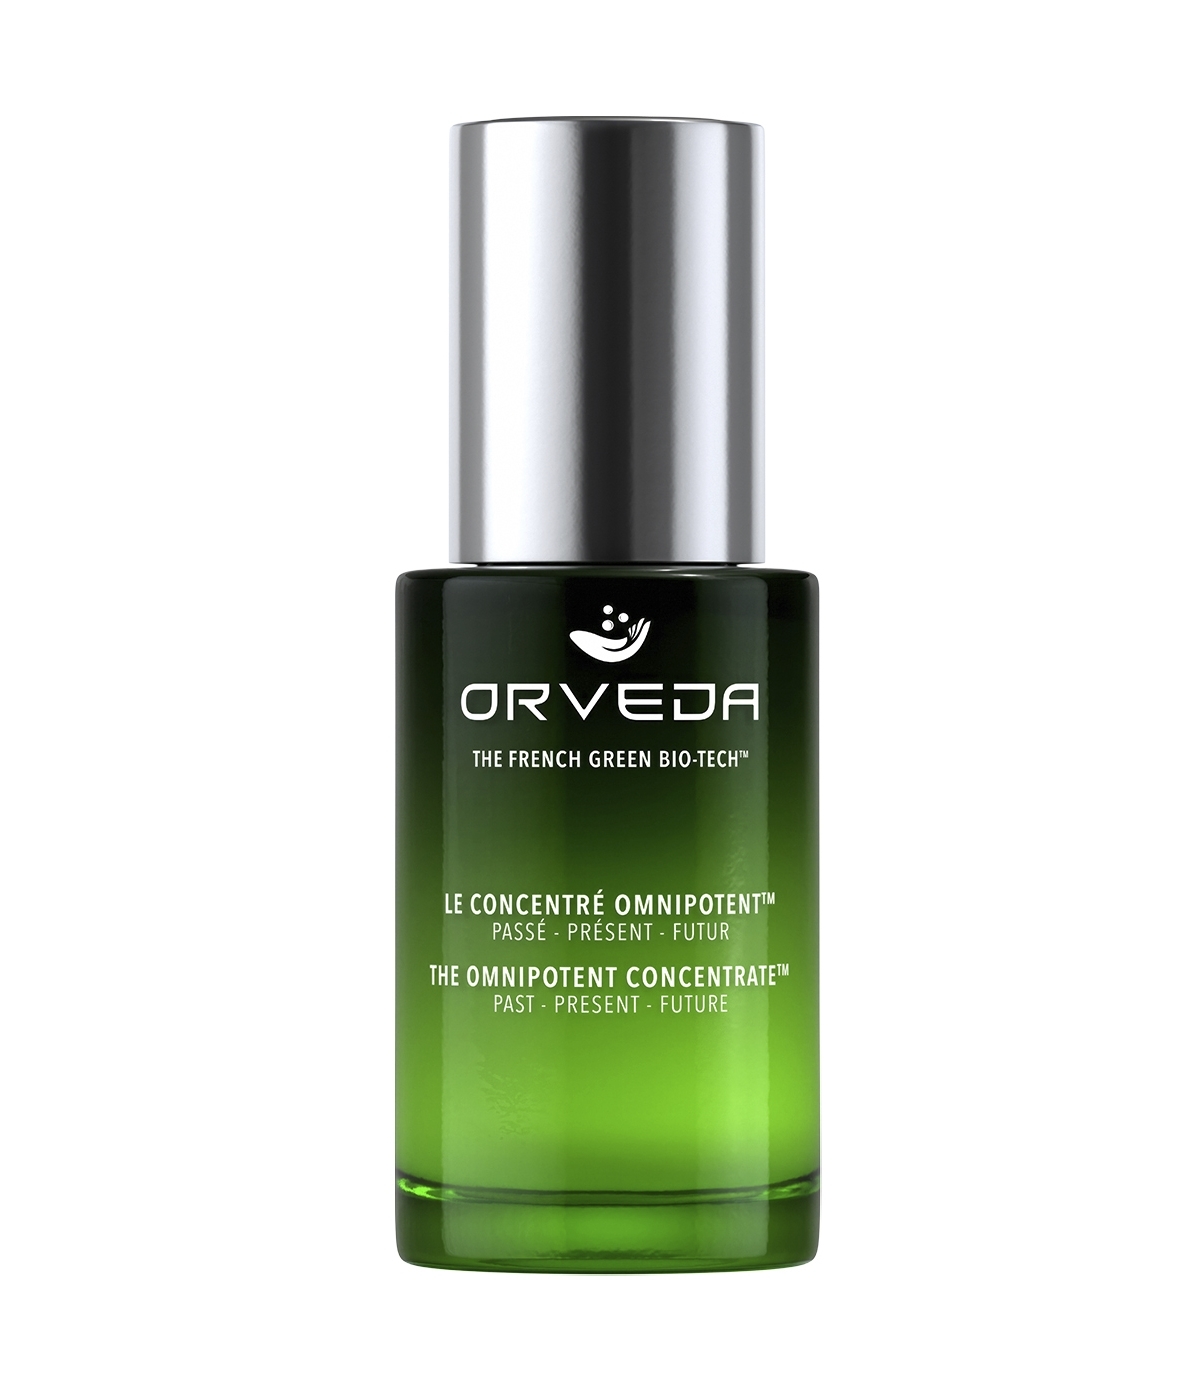 The Omnipotent Concentrate, Orveda (430 euros).